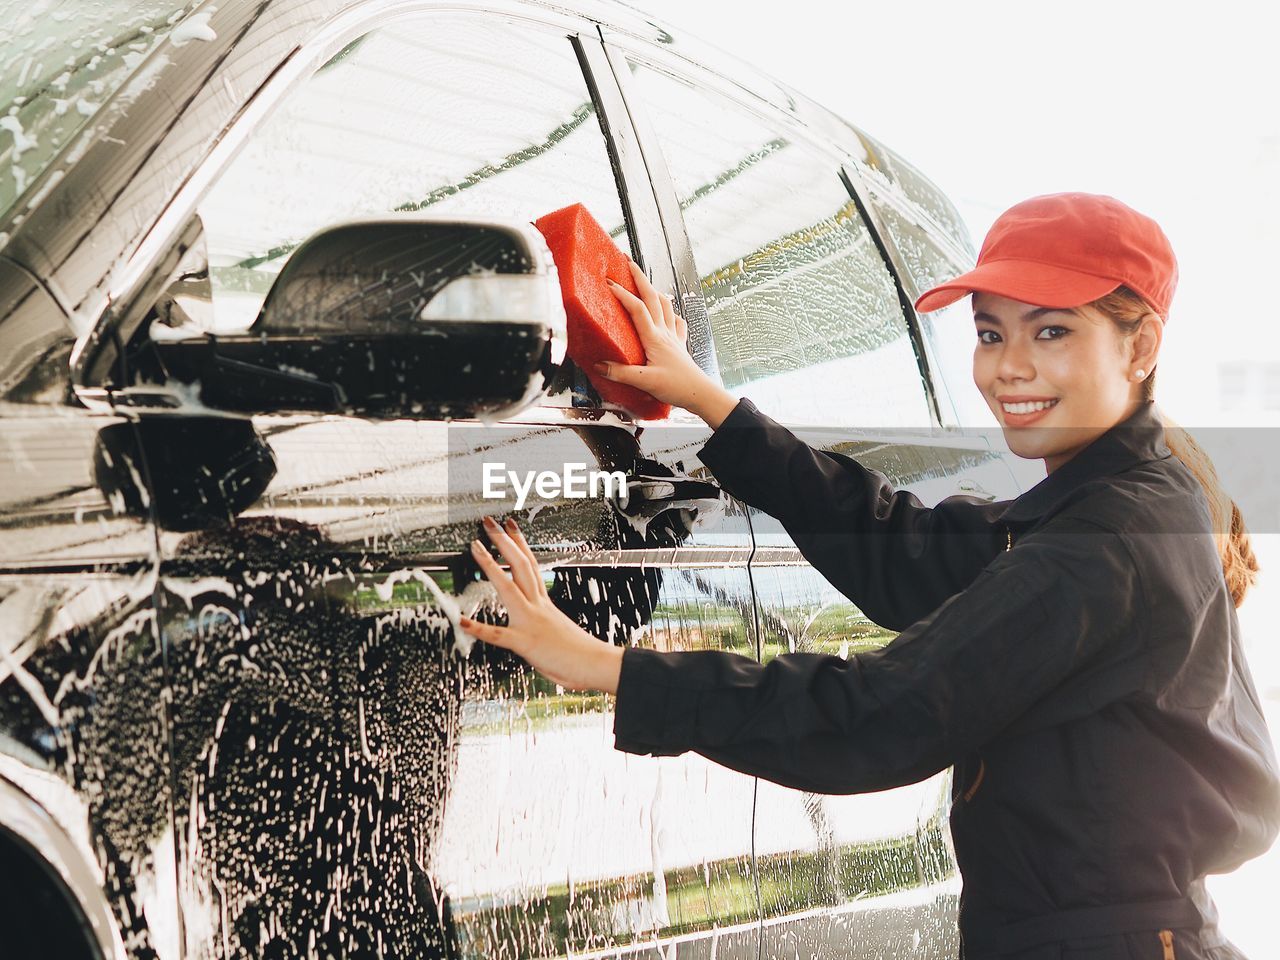 Portrait of smiling young woman cleaning car in workshop